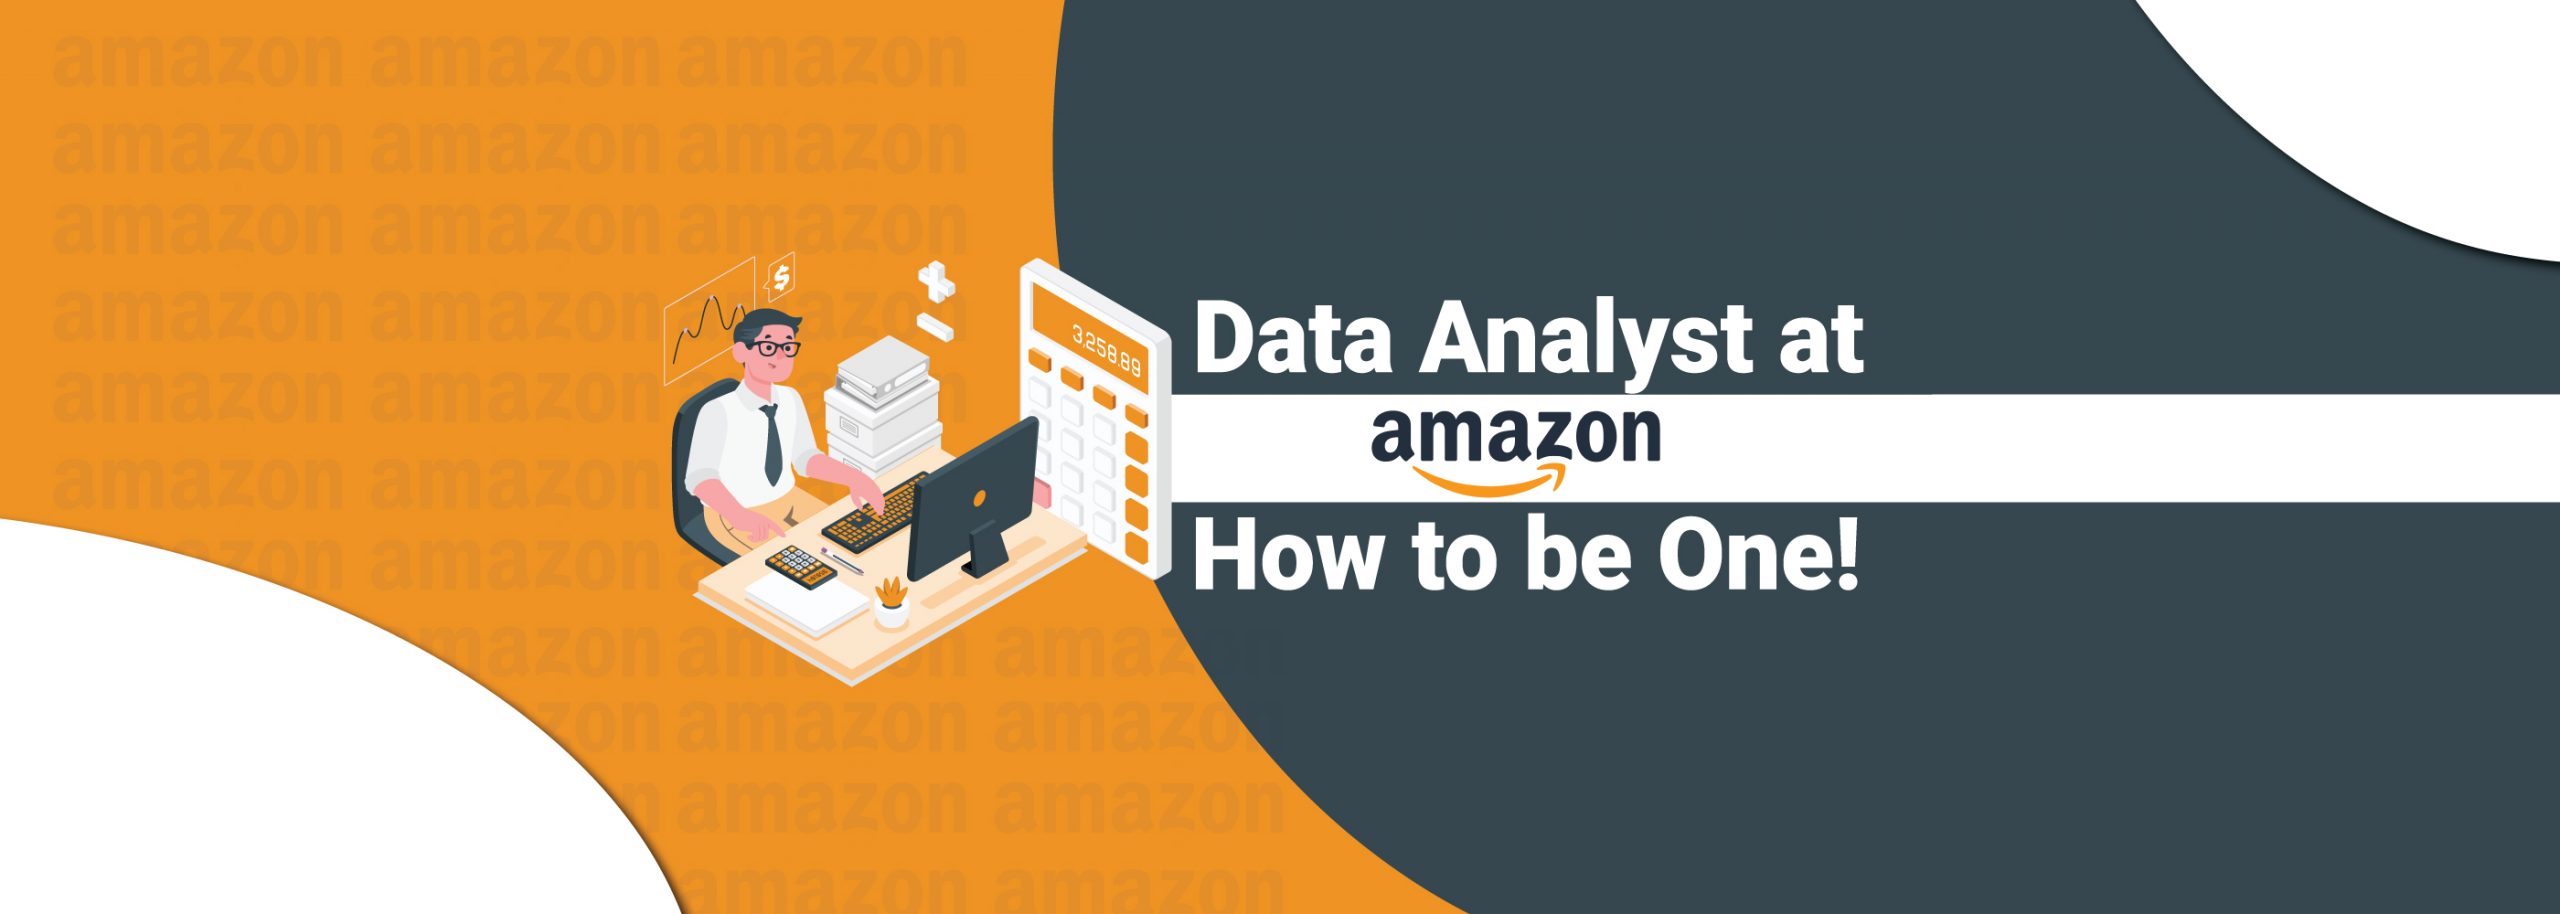 Data Analyst at Amazon- 7 Excellent Ways to be one!